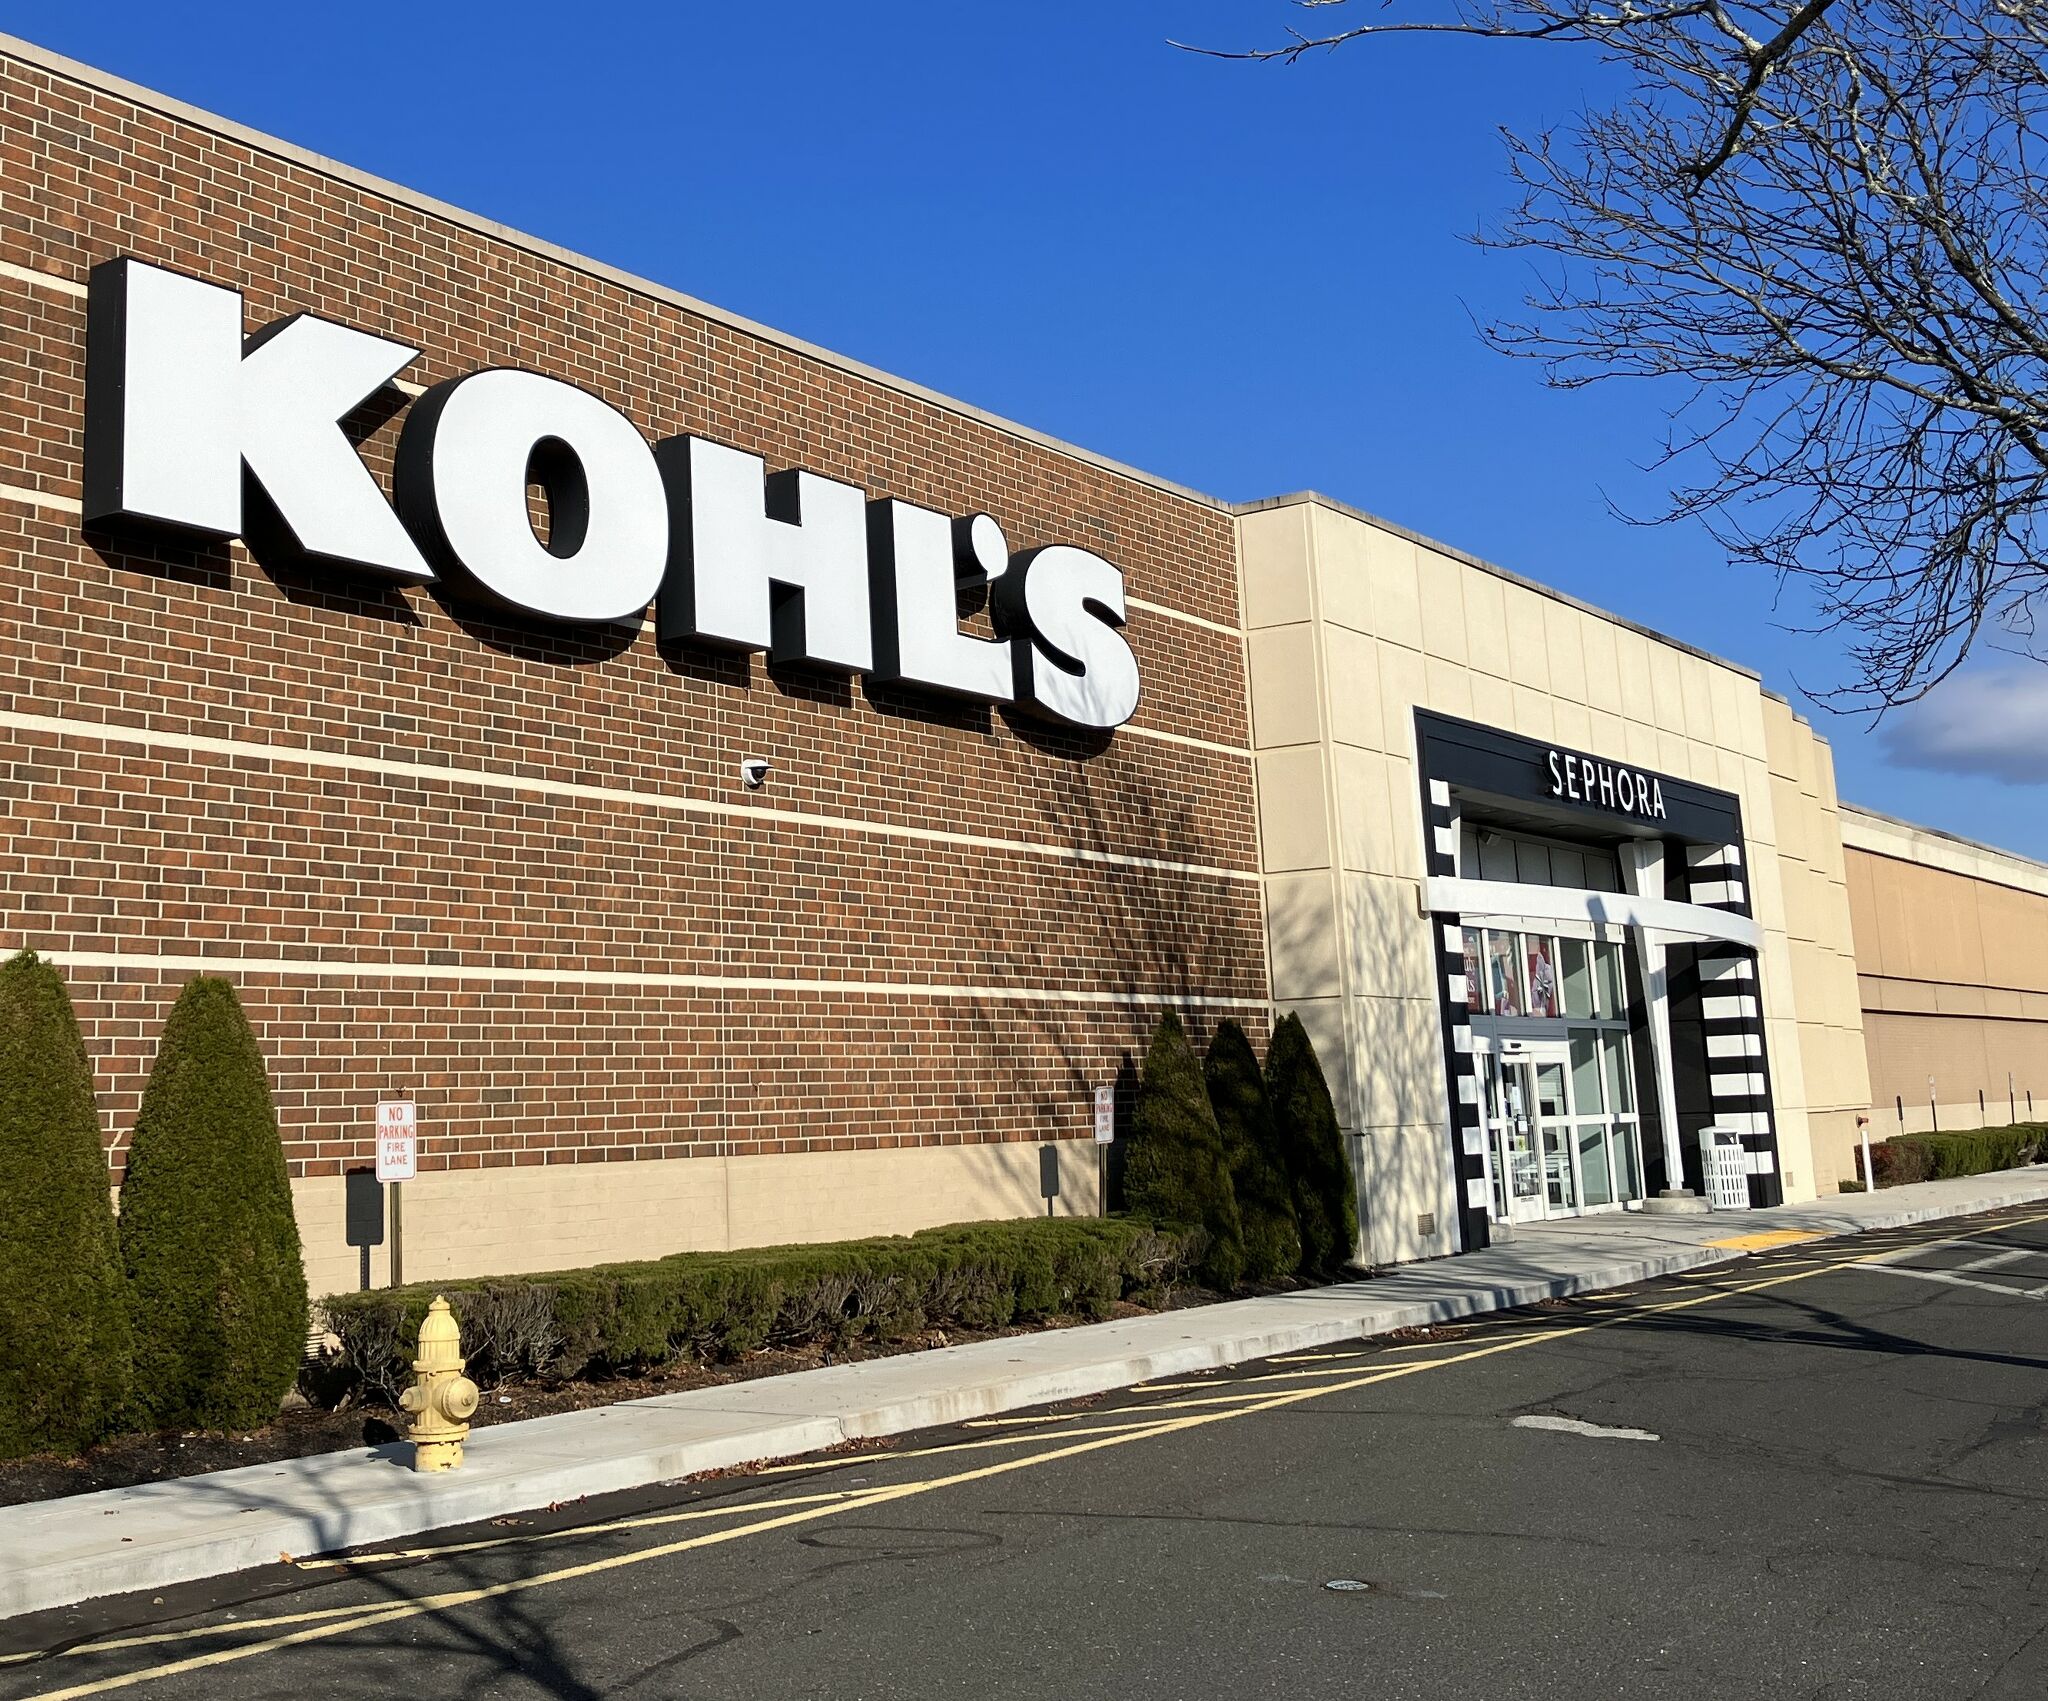 Kohl's partners with lifestyle brand PopSugar to target millennial